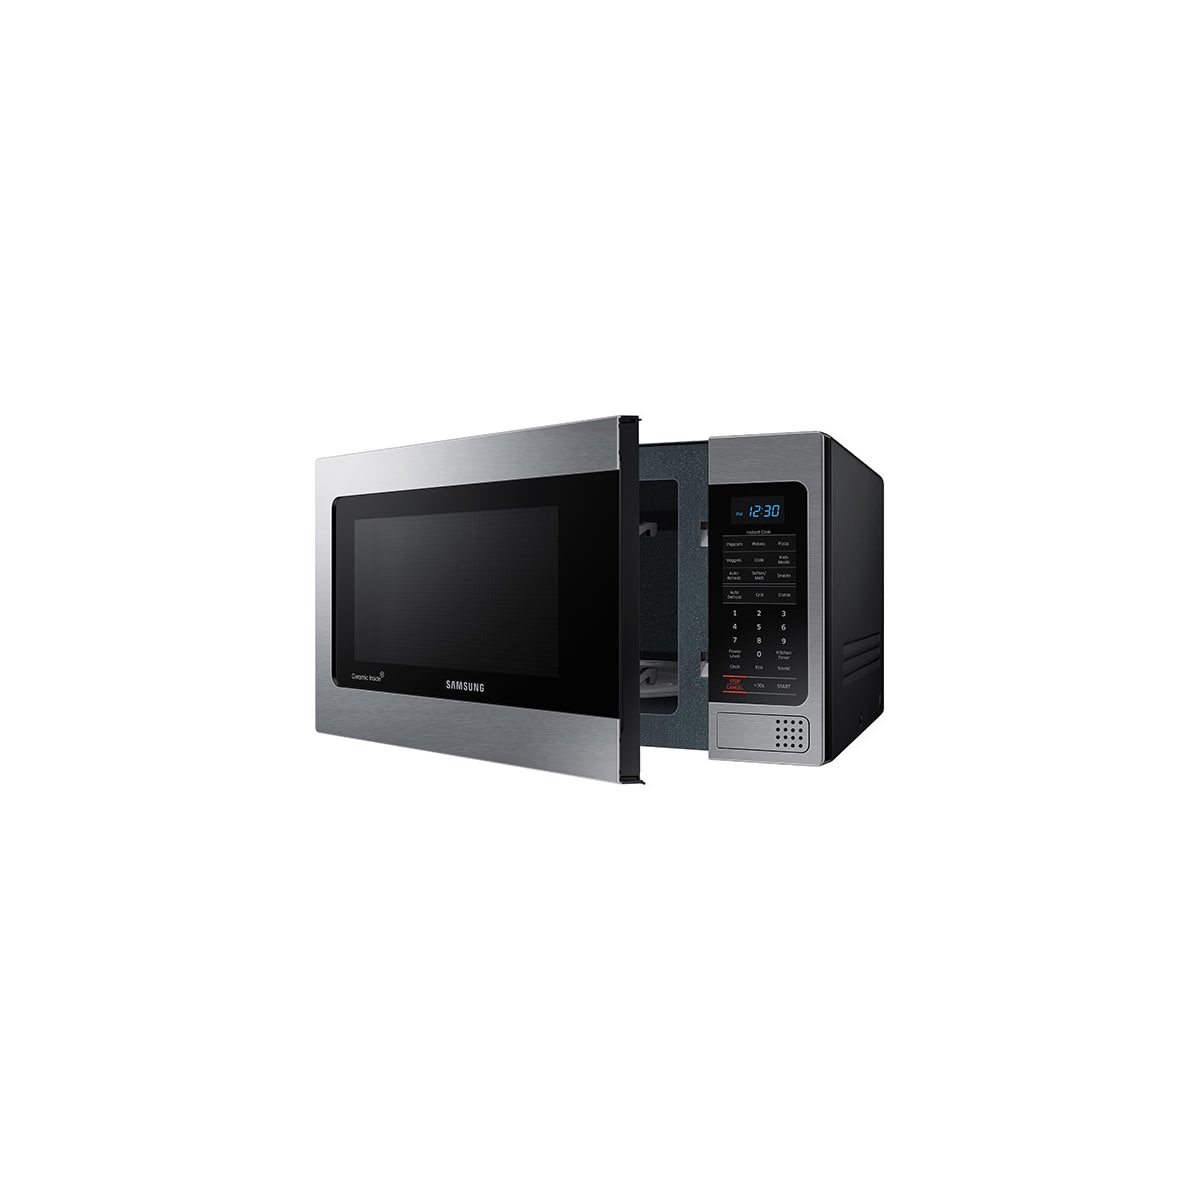 Samsung - 1.1 Cu. ft. Countertop Microwave with Grilling Element - Stainless Steel